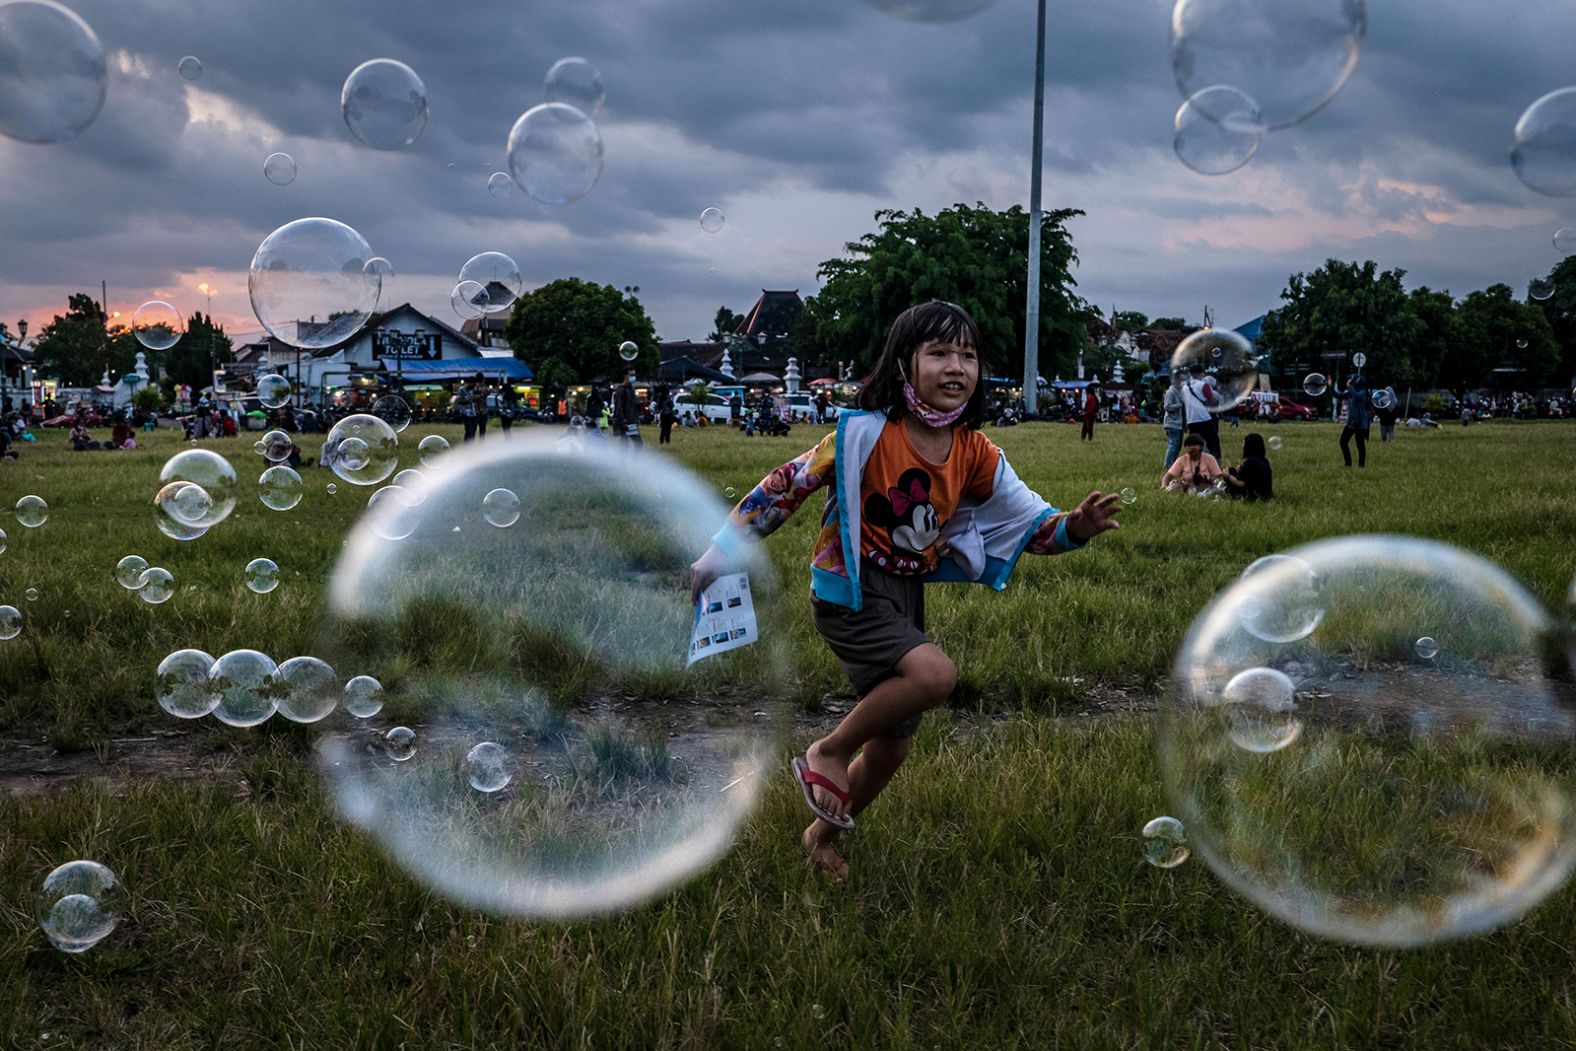 A child plays with soap bubbles as Muslims prepare to break their fast in Yogyakarta, Indonesia.